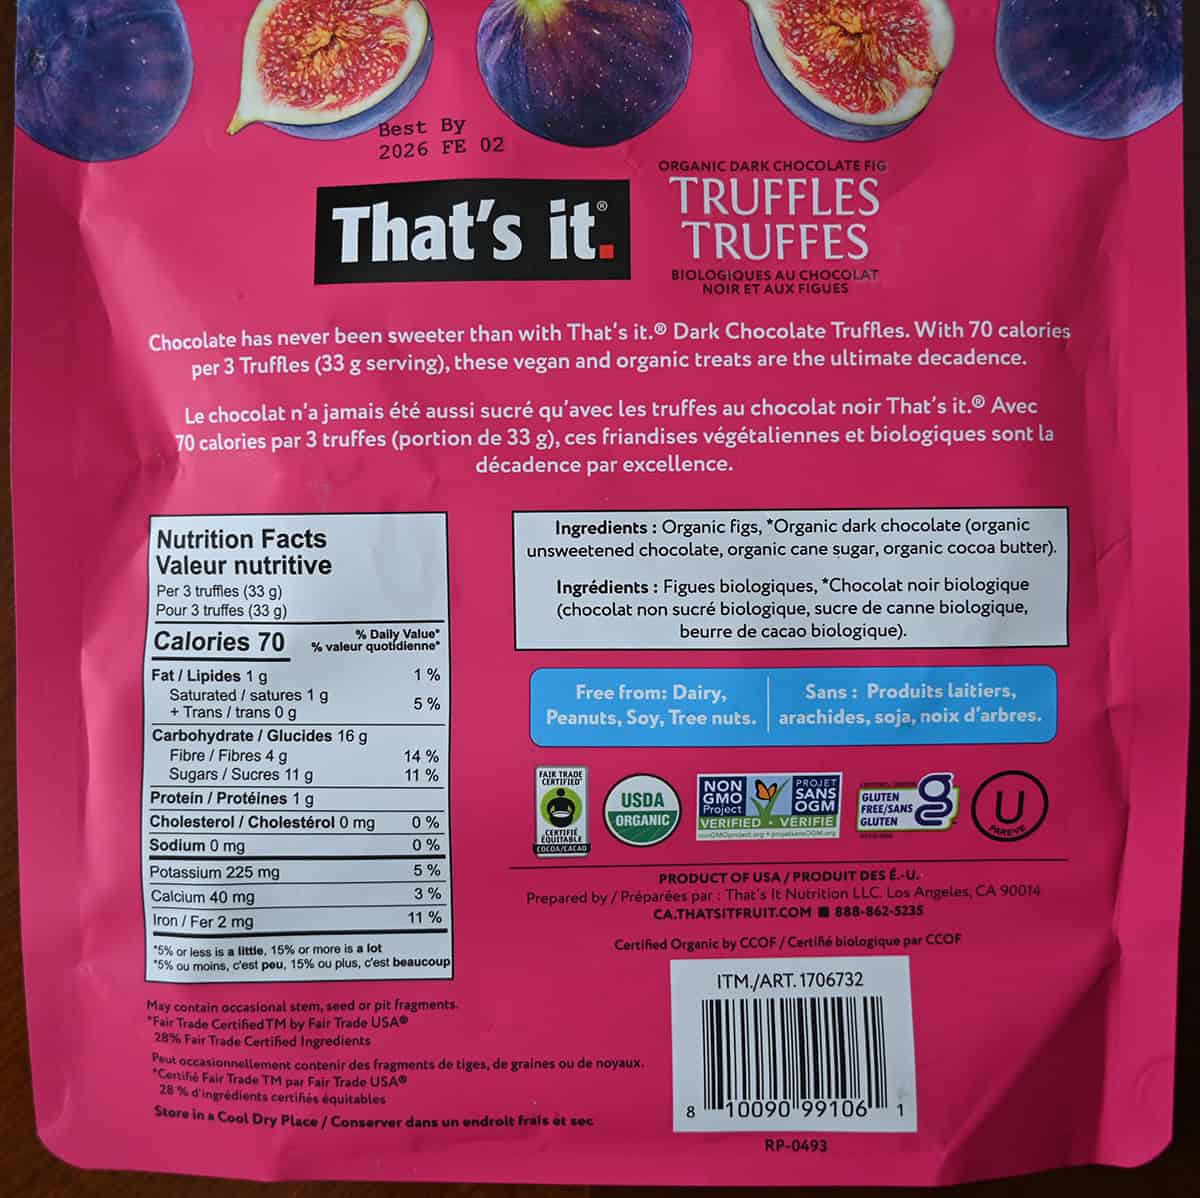 Image of the back of the bag of truffles showing ingredients, company description and ingredients.